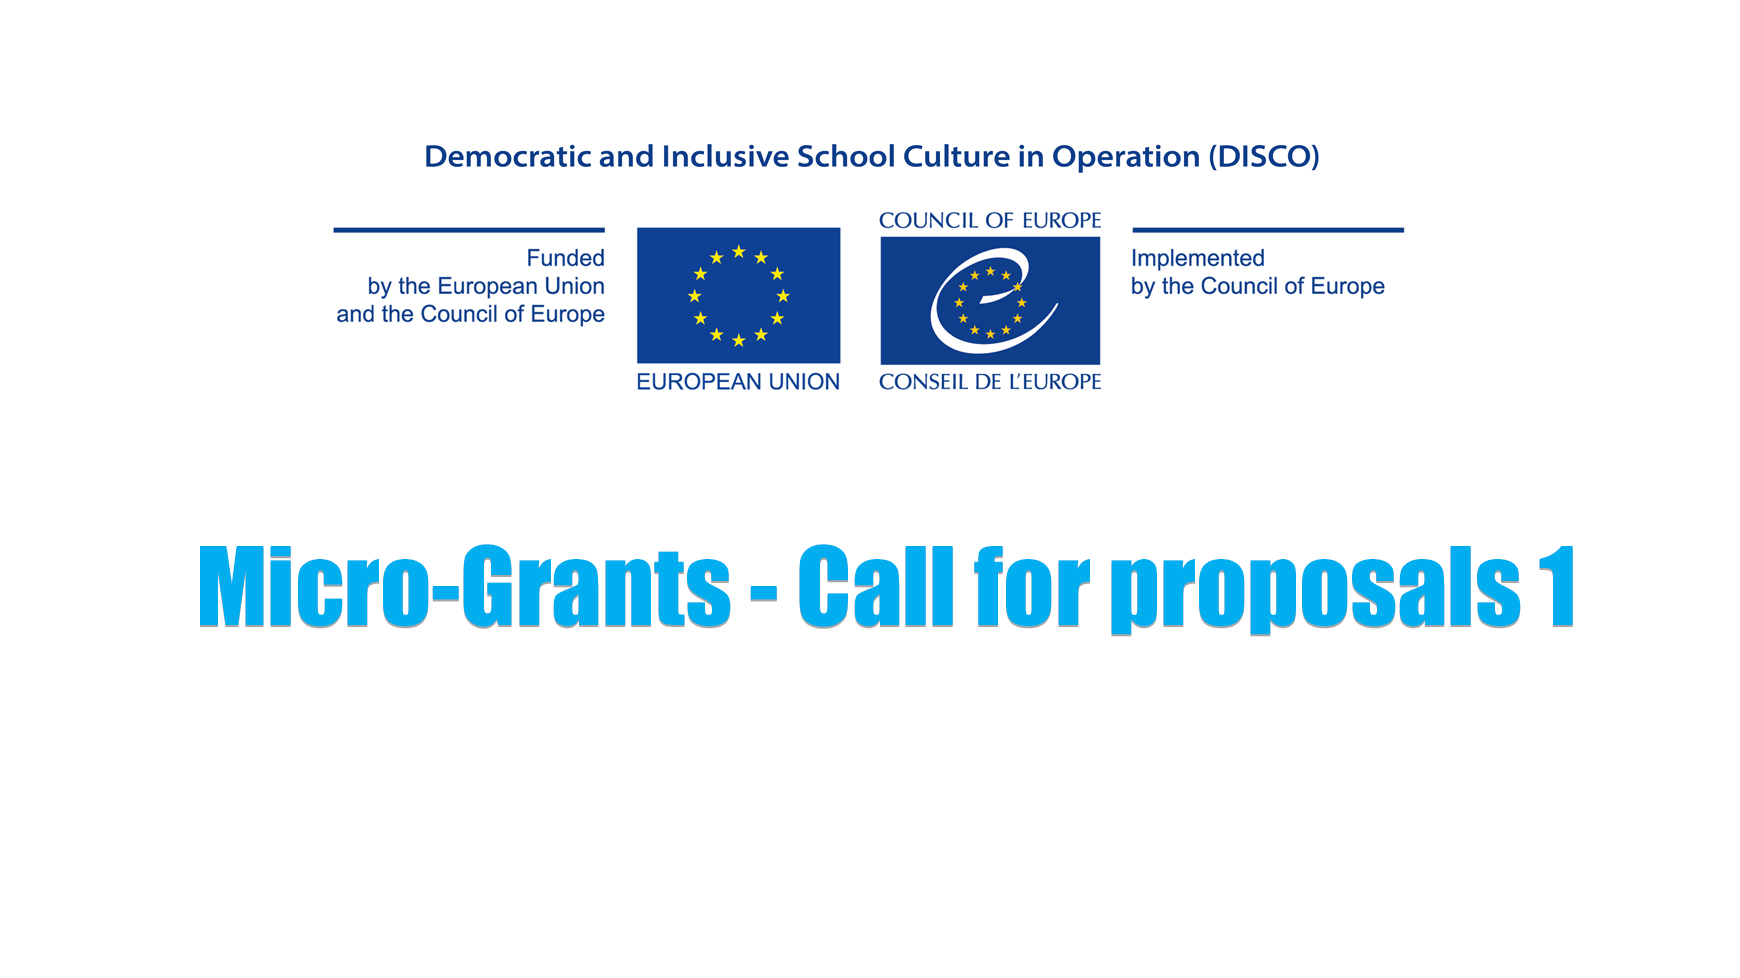 DISCO Call for proposals: micro-grants to support small-scale activities disseminating and further promoting previous cycles’ outcomes